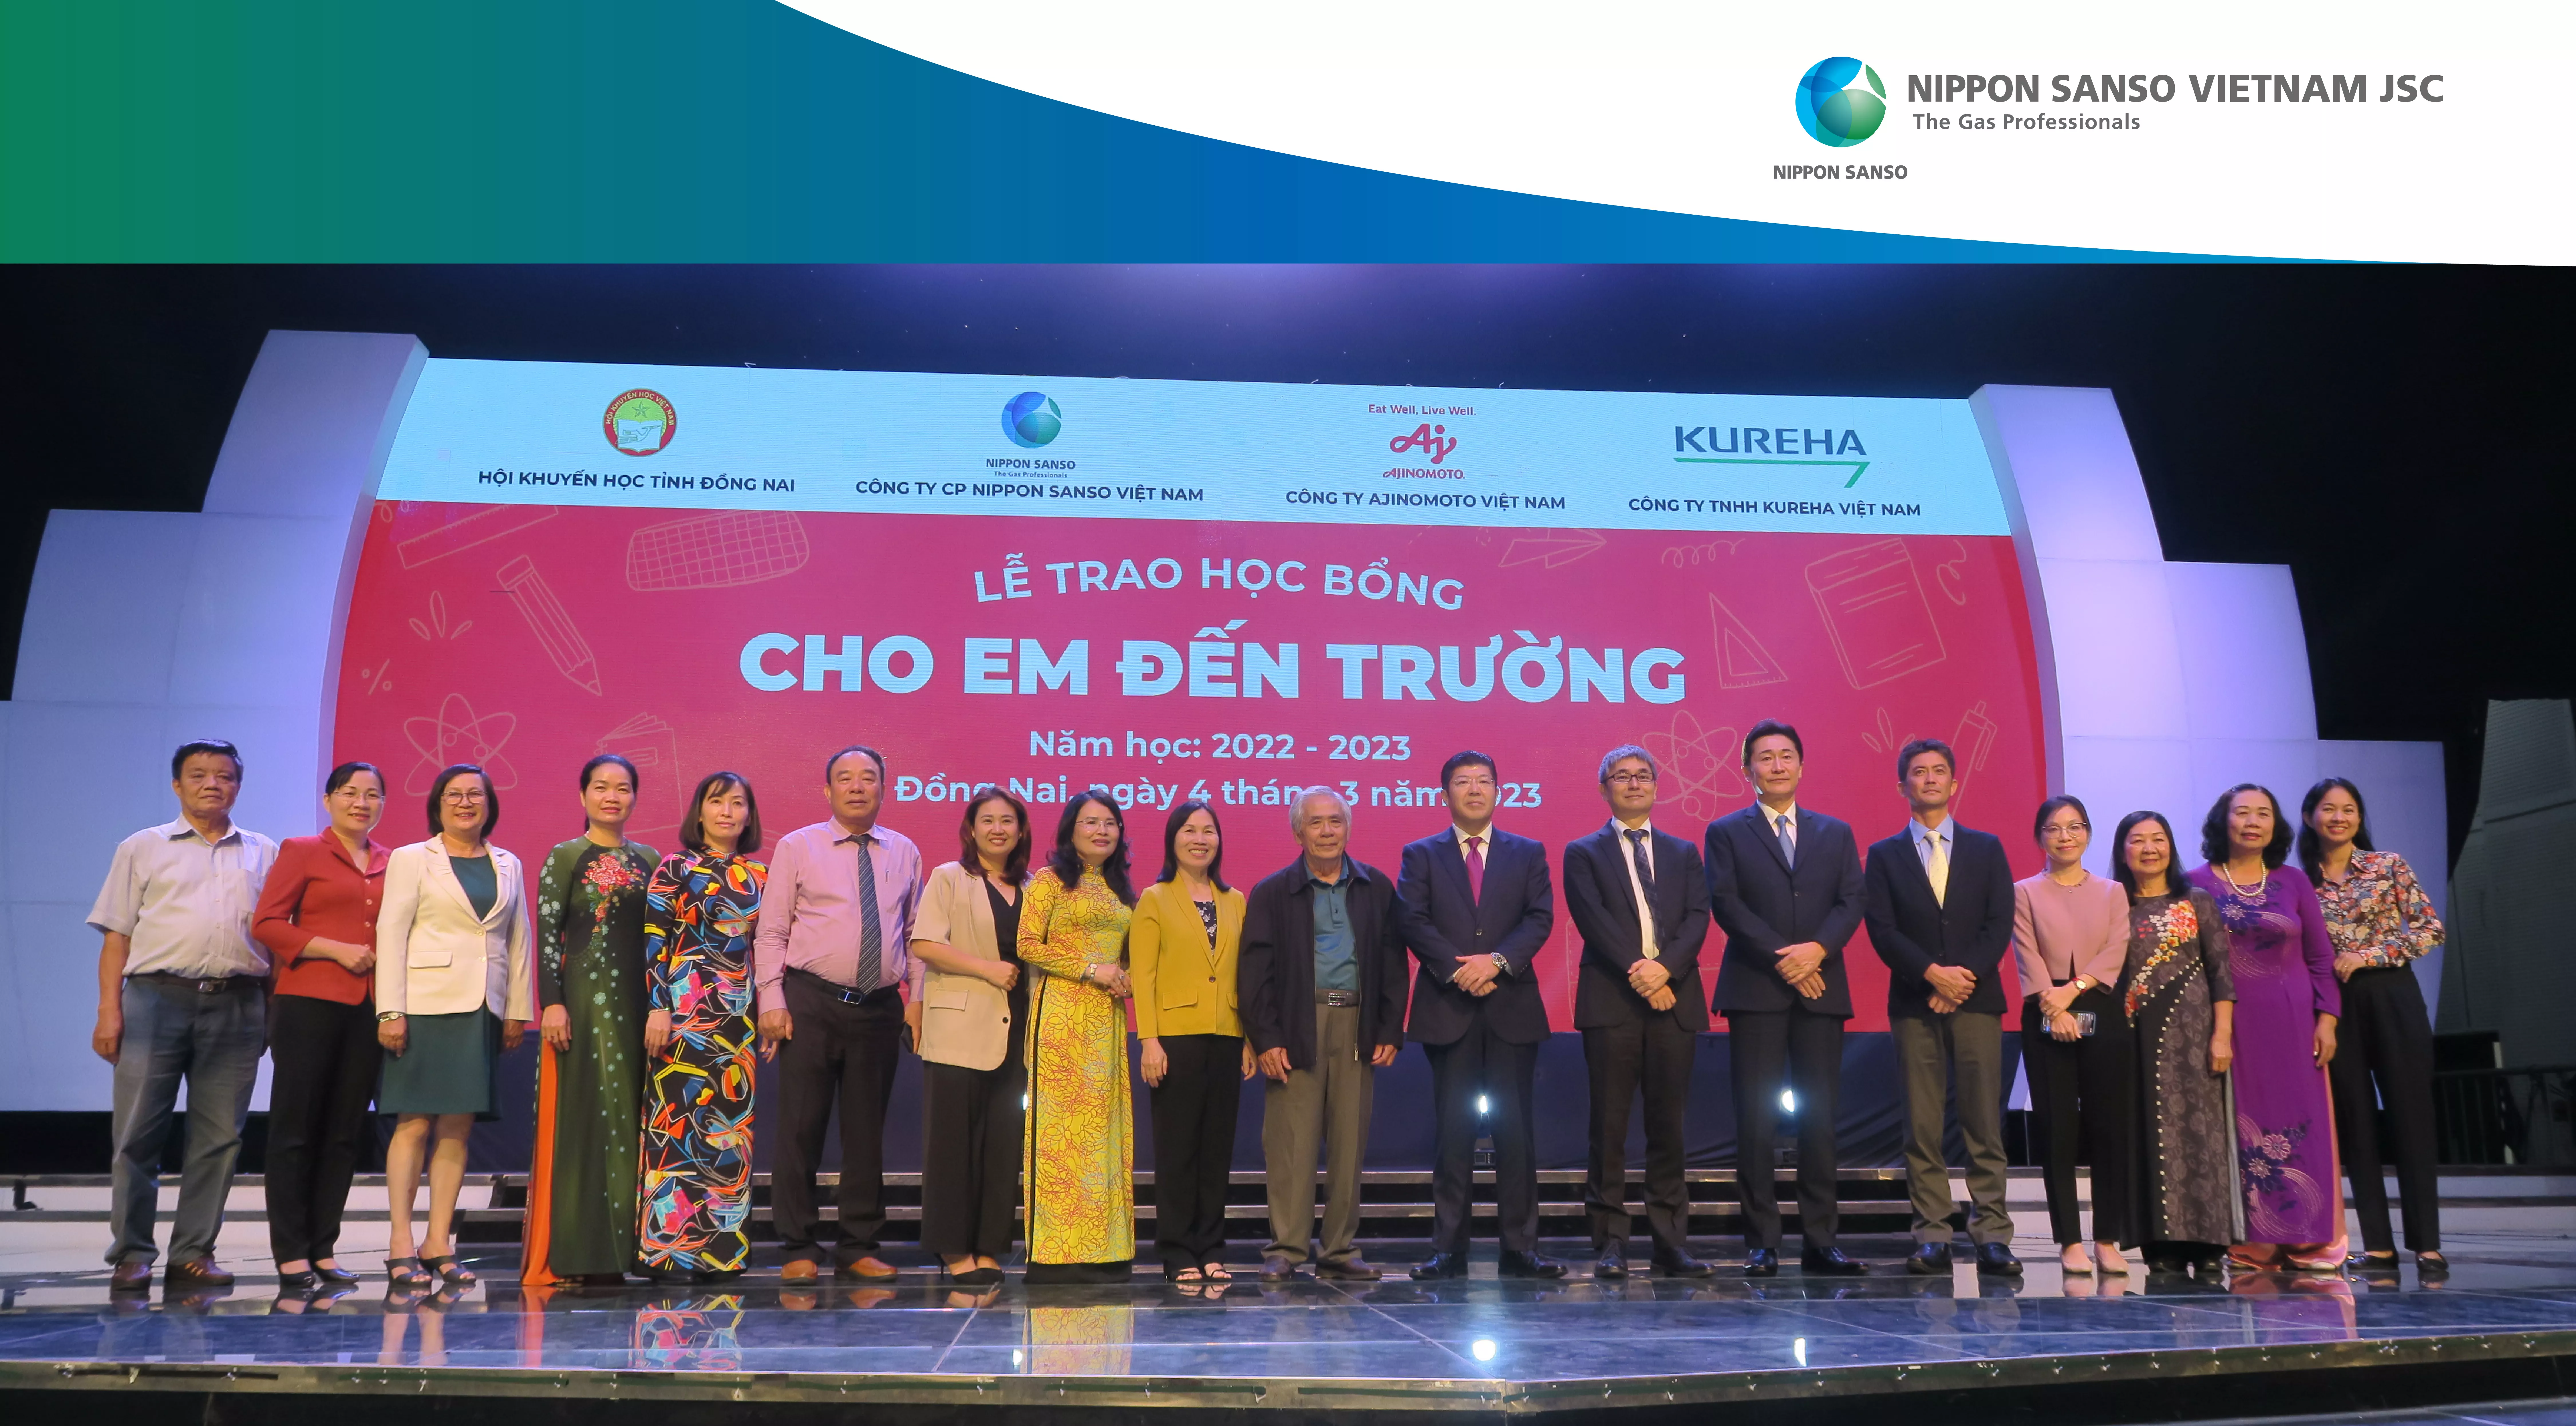 Mr. Masayoshi Oomichi – General Director and Ms. Do Mai Dung – Director of Corporate Management Division on behalf of Nippon Sanso Vietnam at the ceremony